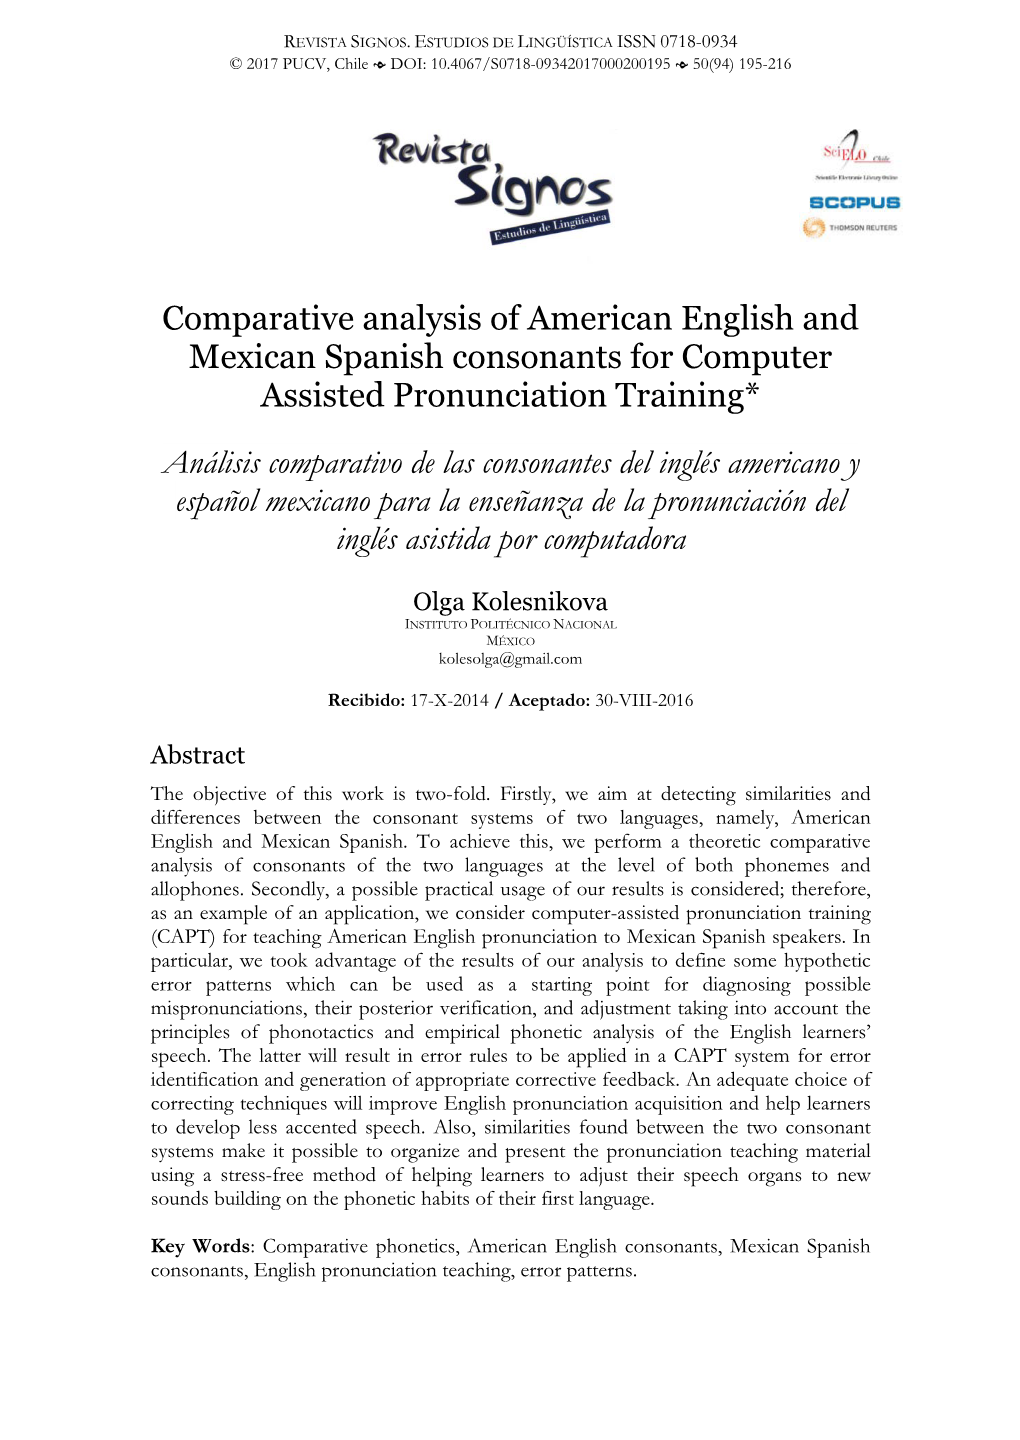 Comparative Analysis of American English and Mexican Spanish Consonants for Computer Assisted Pronunciation Training*